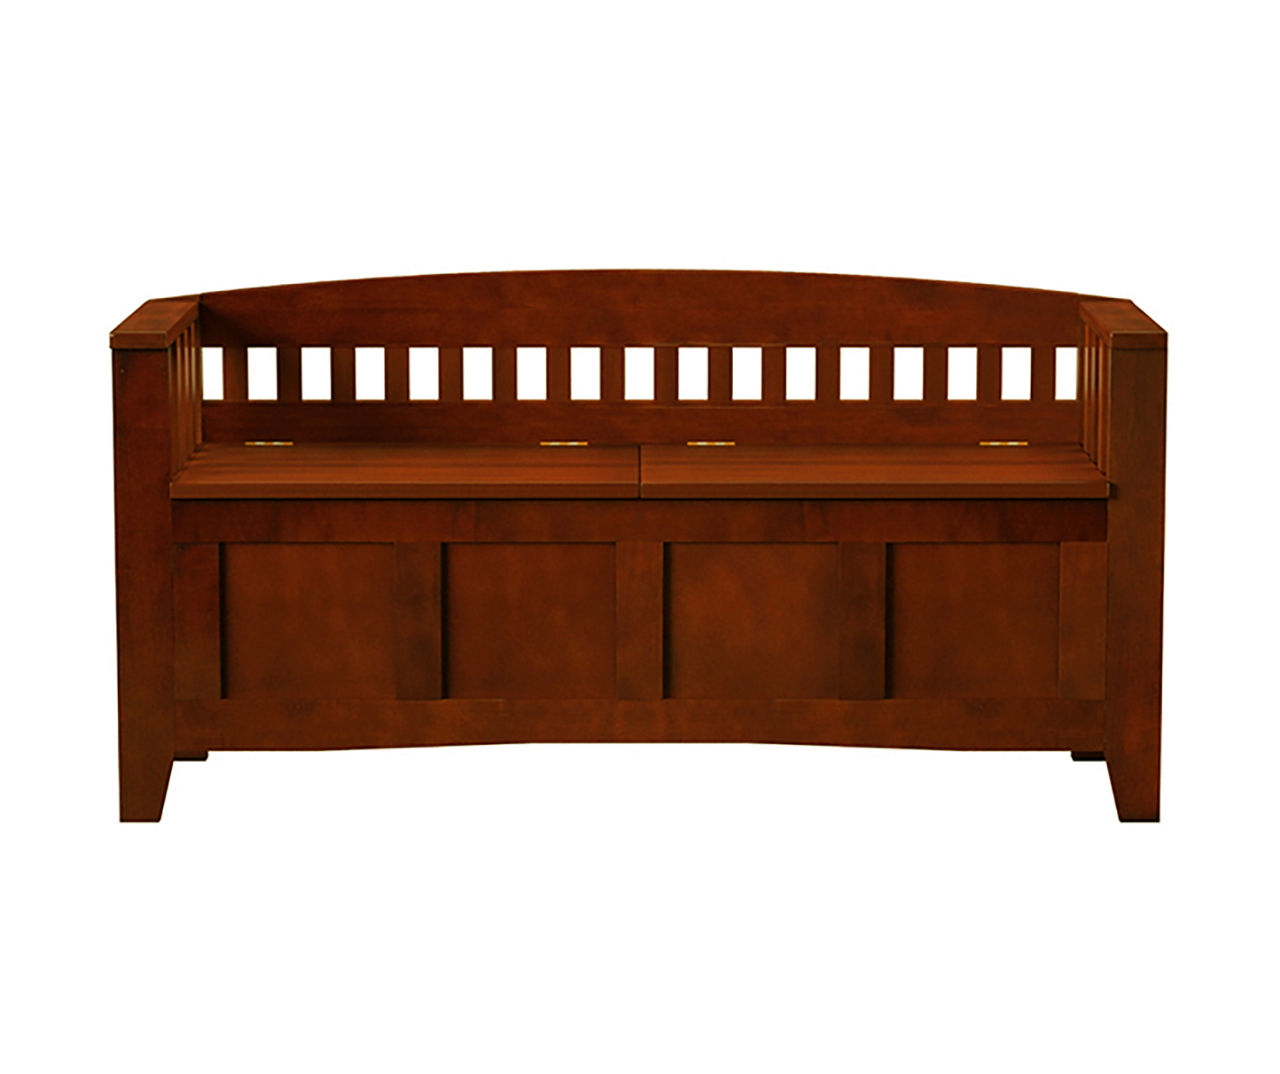 FORT MYERS 3 section entryway bench with storage